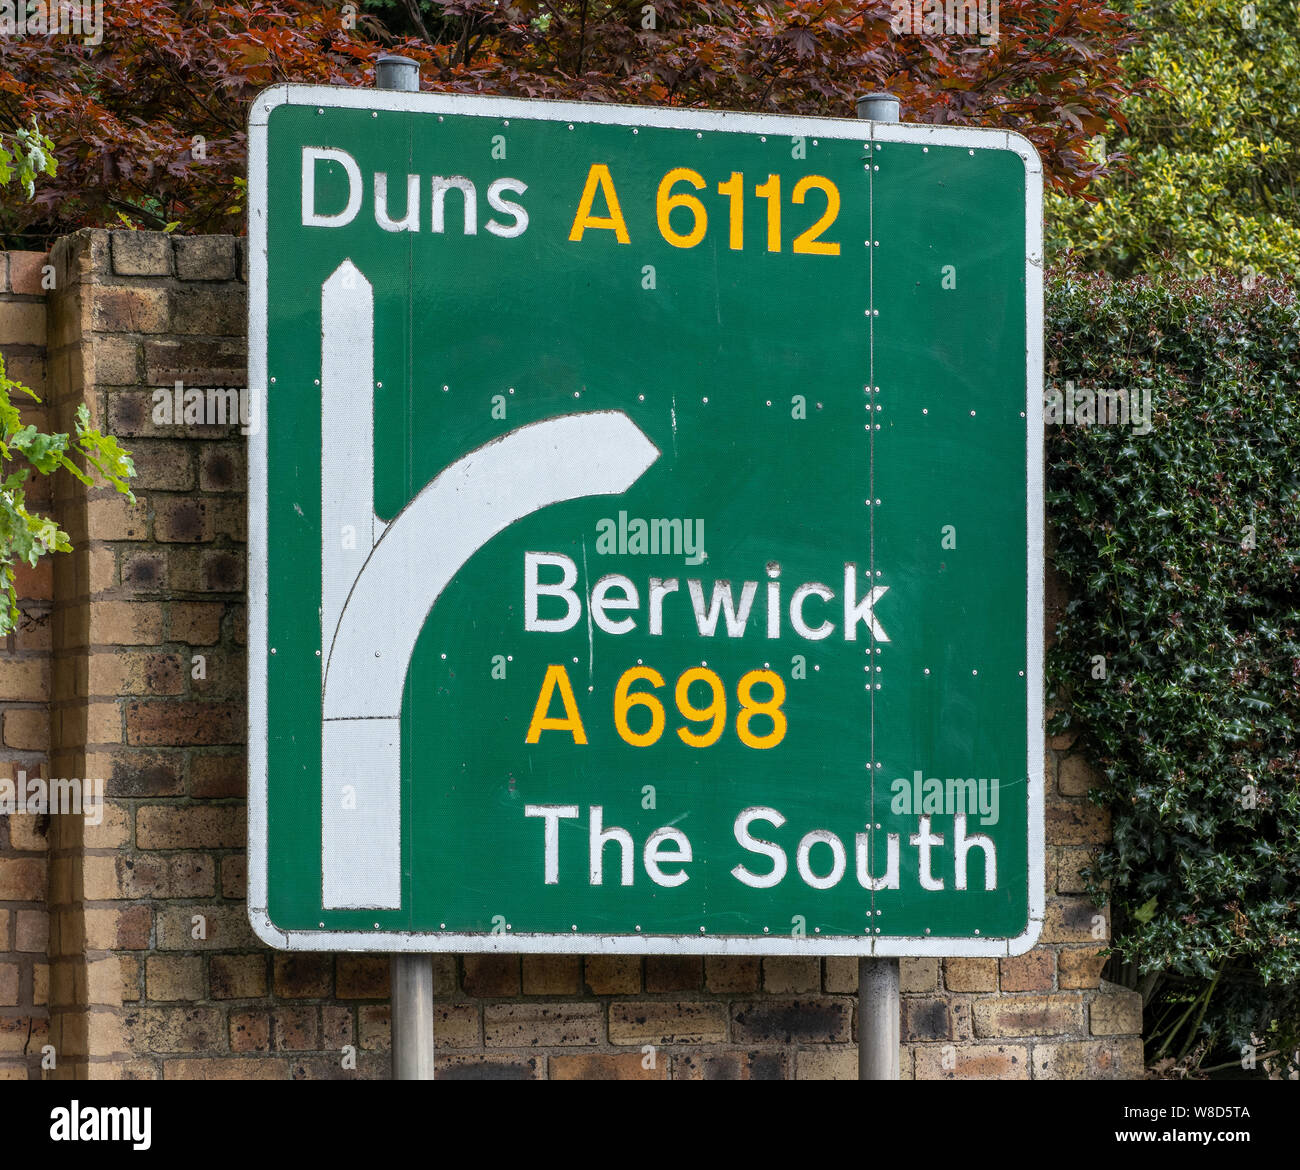 A road sign for Duns and Berwick in Coldstream, Scottish Borders, UK. Stock Photo